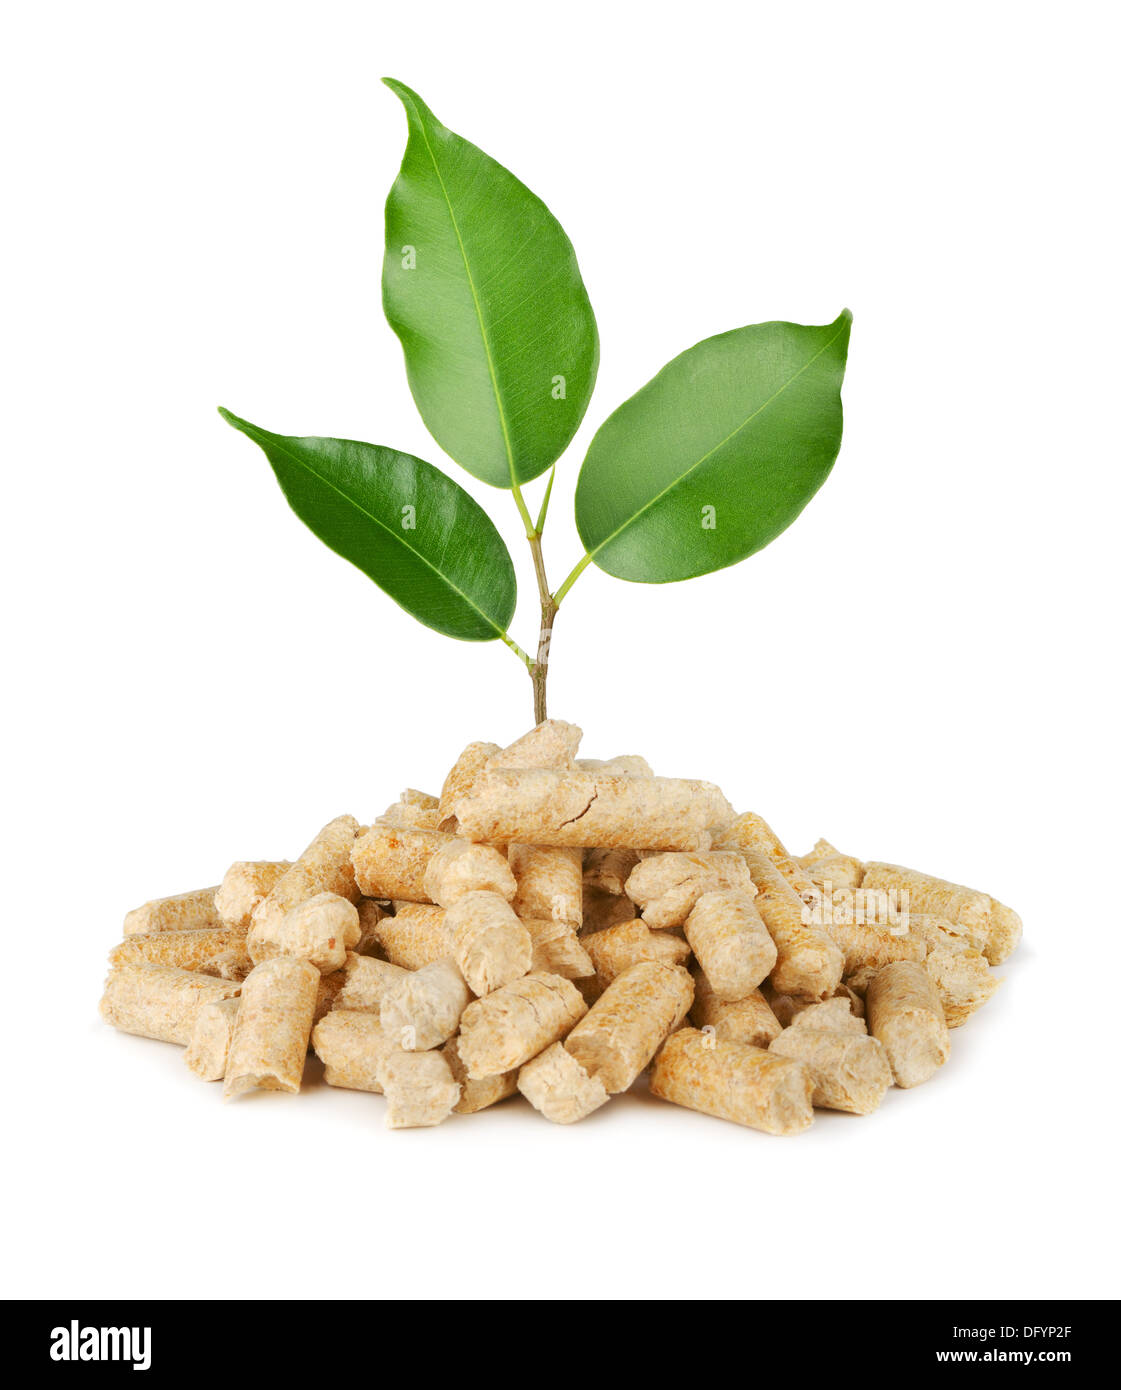 Young plant growing out of wood pellets isolated on white Stock Photo